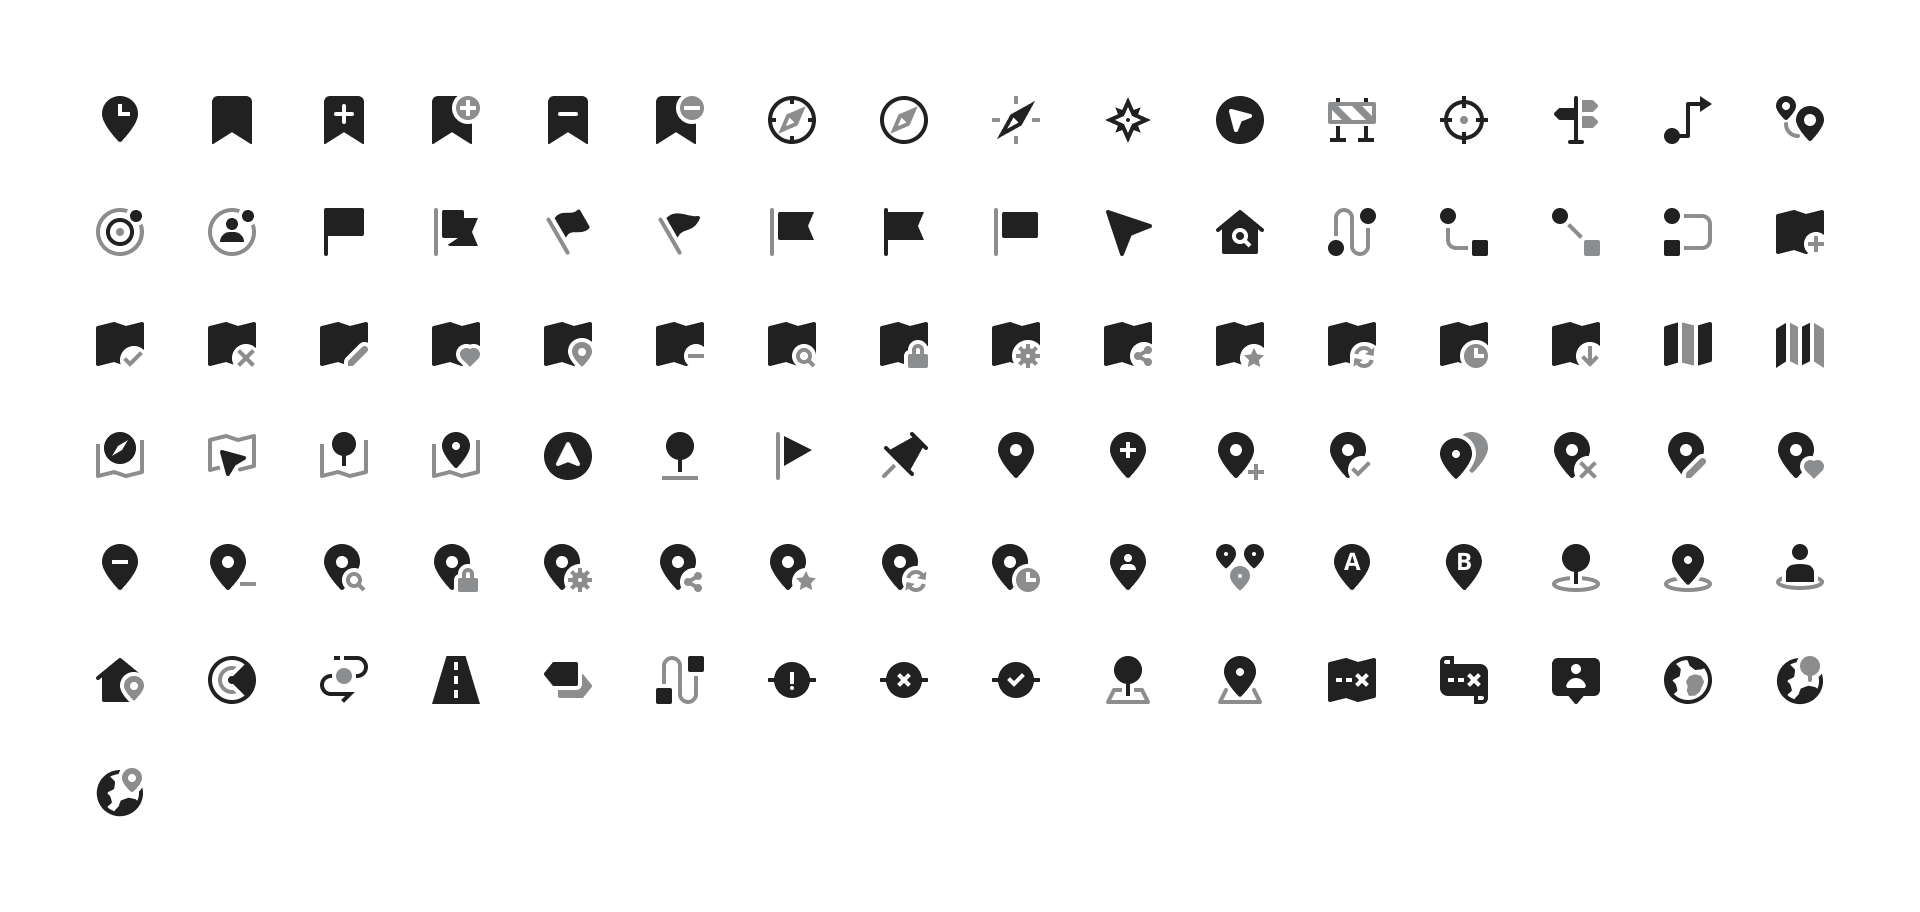 Maps and Location Icons